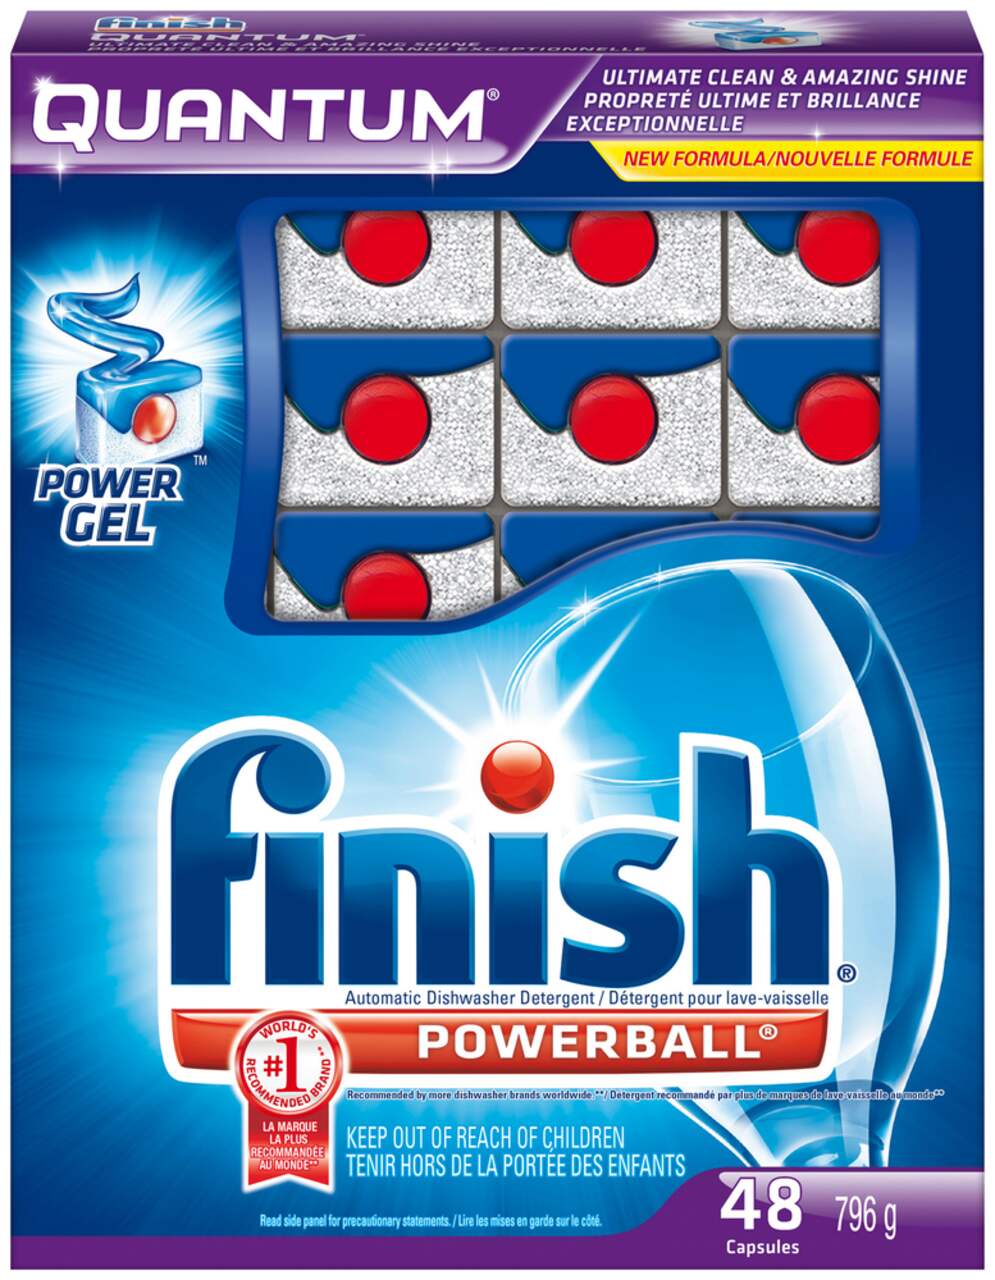 Finish - Finish, Powerball - Dishwasher Detergent, Automatic, Deep Clean,  Tablets (36 count), Shop